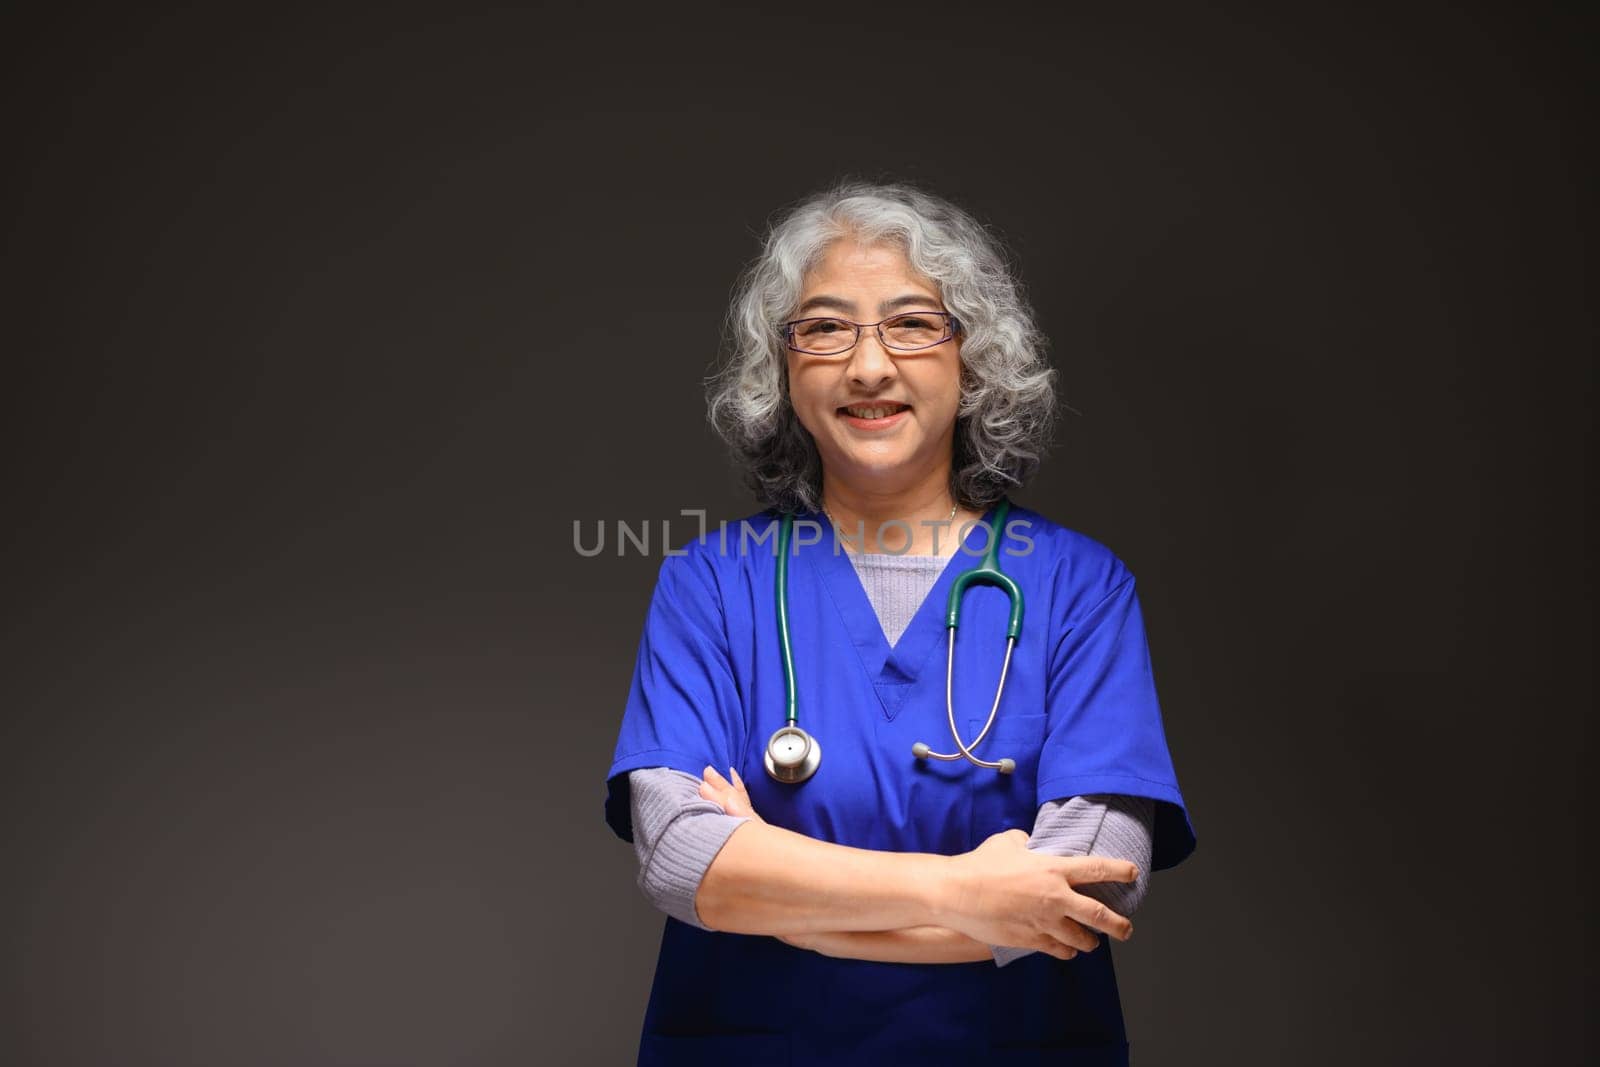 Portrait of friendly mature female doctor with stethoscope around her neck standing on black background by prathanchorruangsak